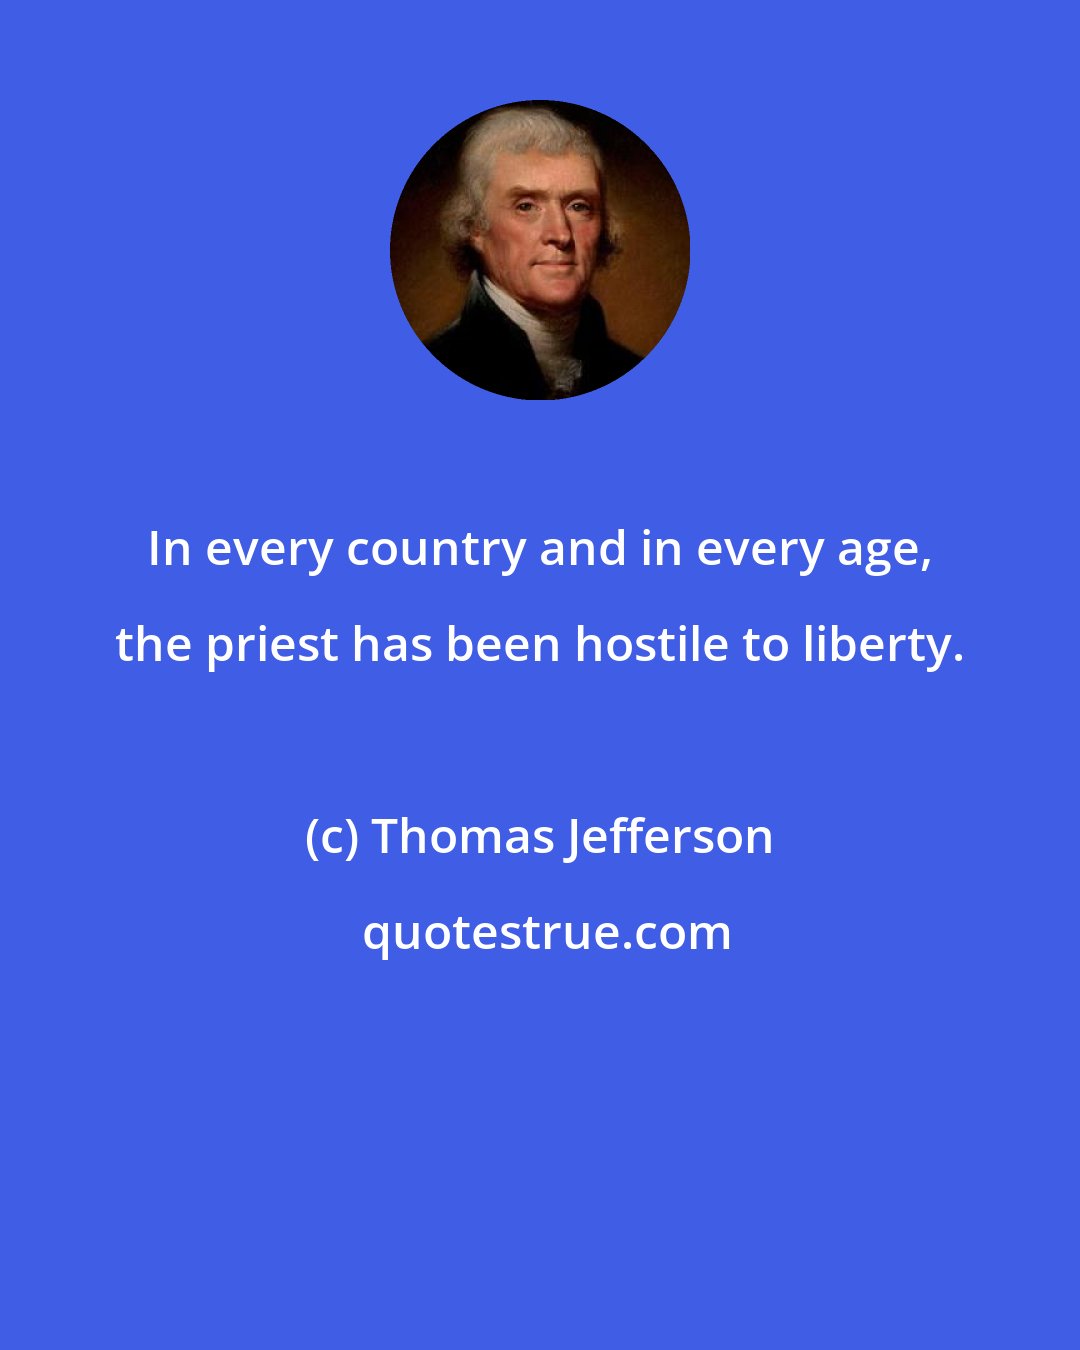 Thomas Jefferson: In every country and in every age, the priest has been hostile to liberty.